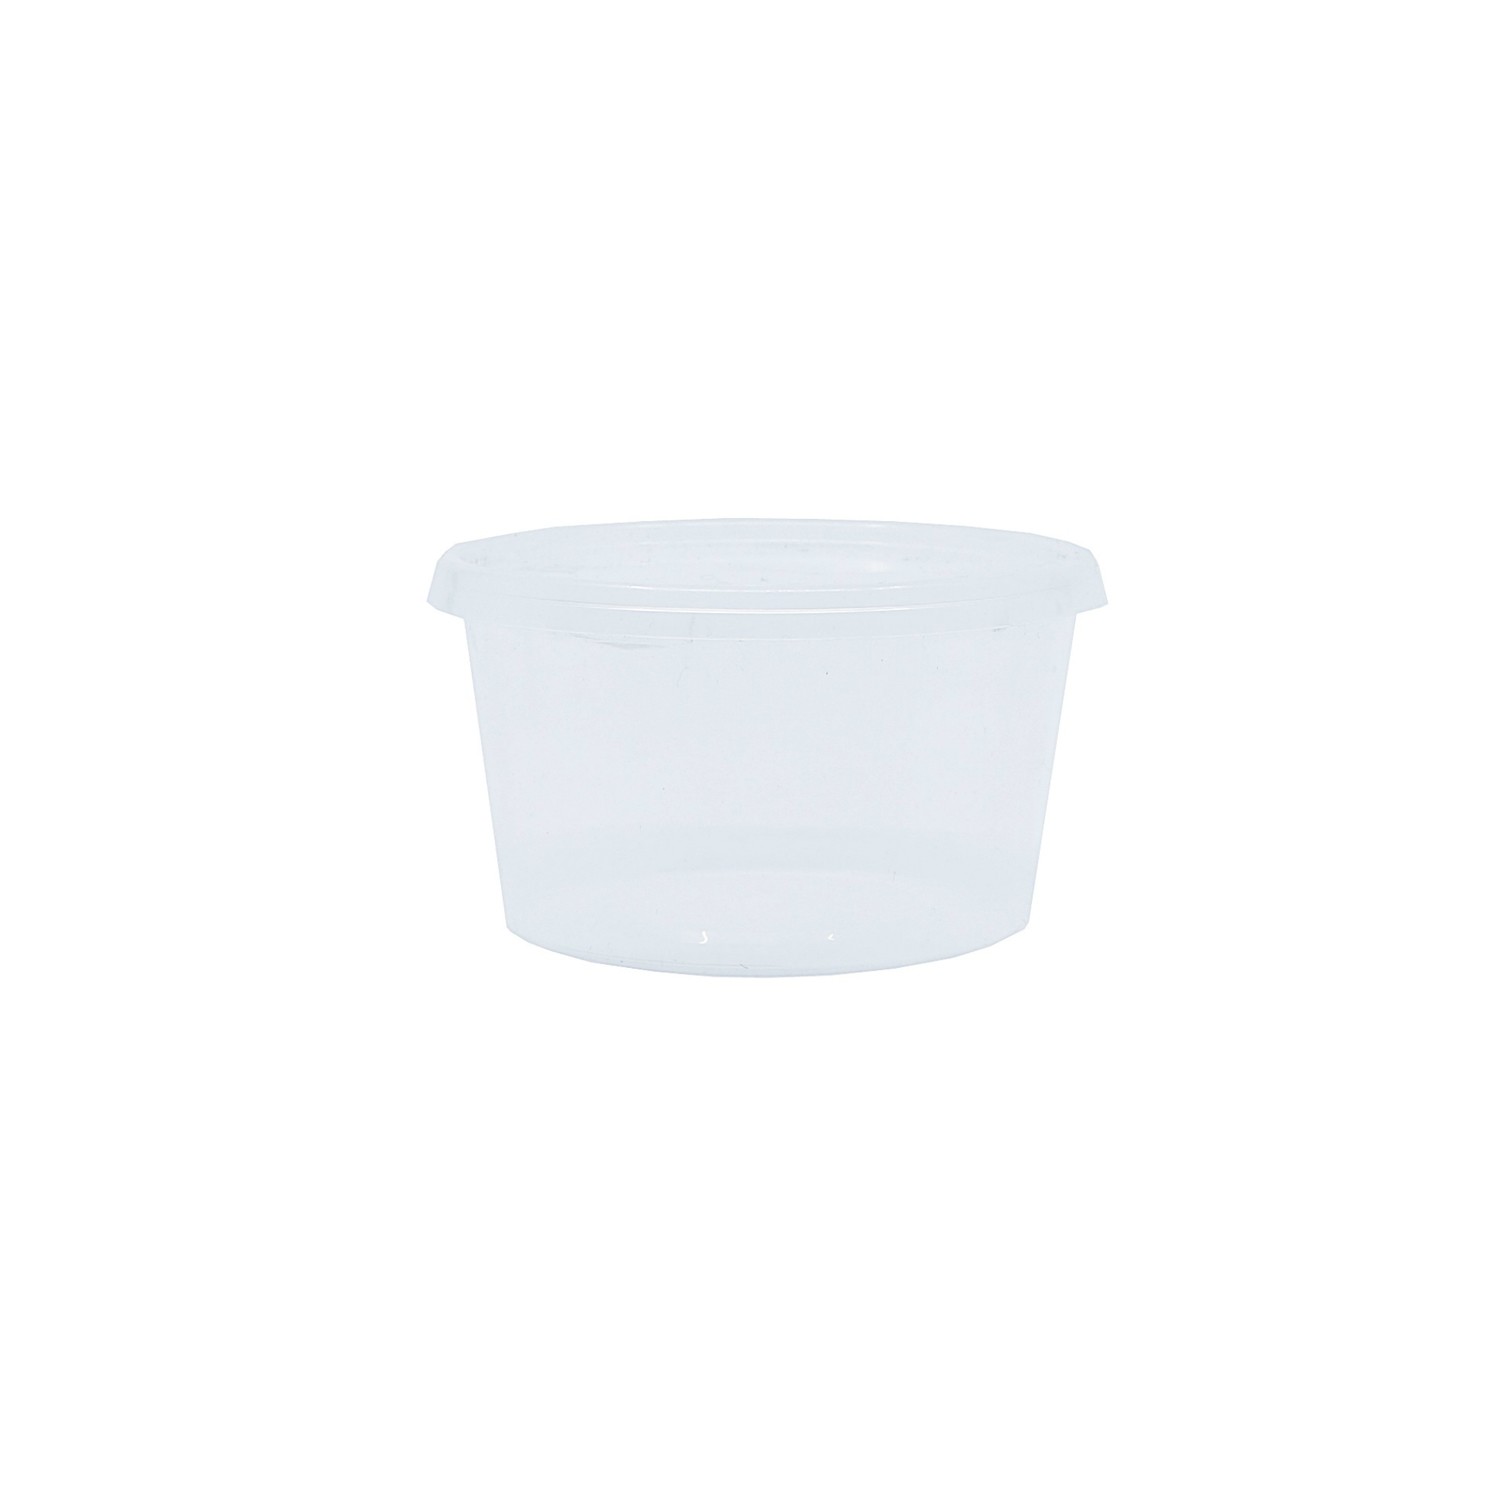 125ml, Round Microwaveable Container